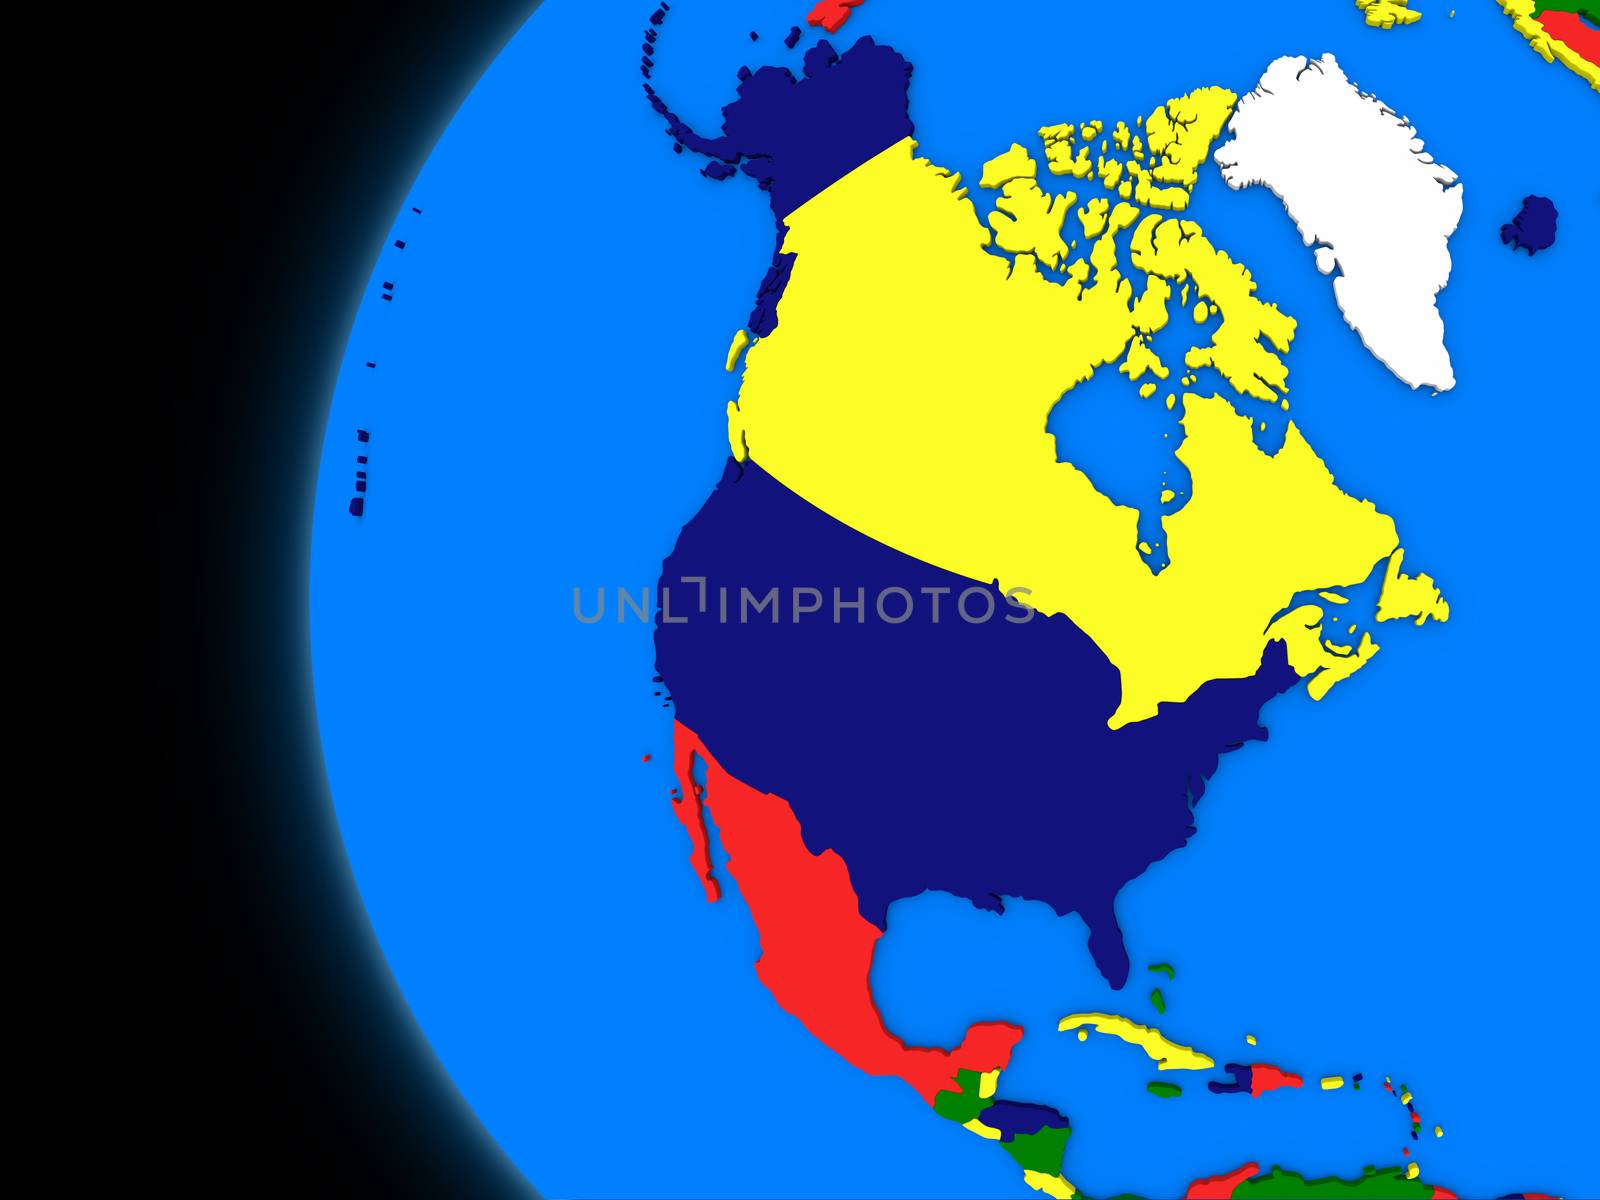 Illustration of north american continent on political globe with black background